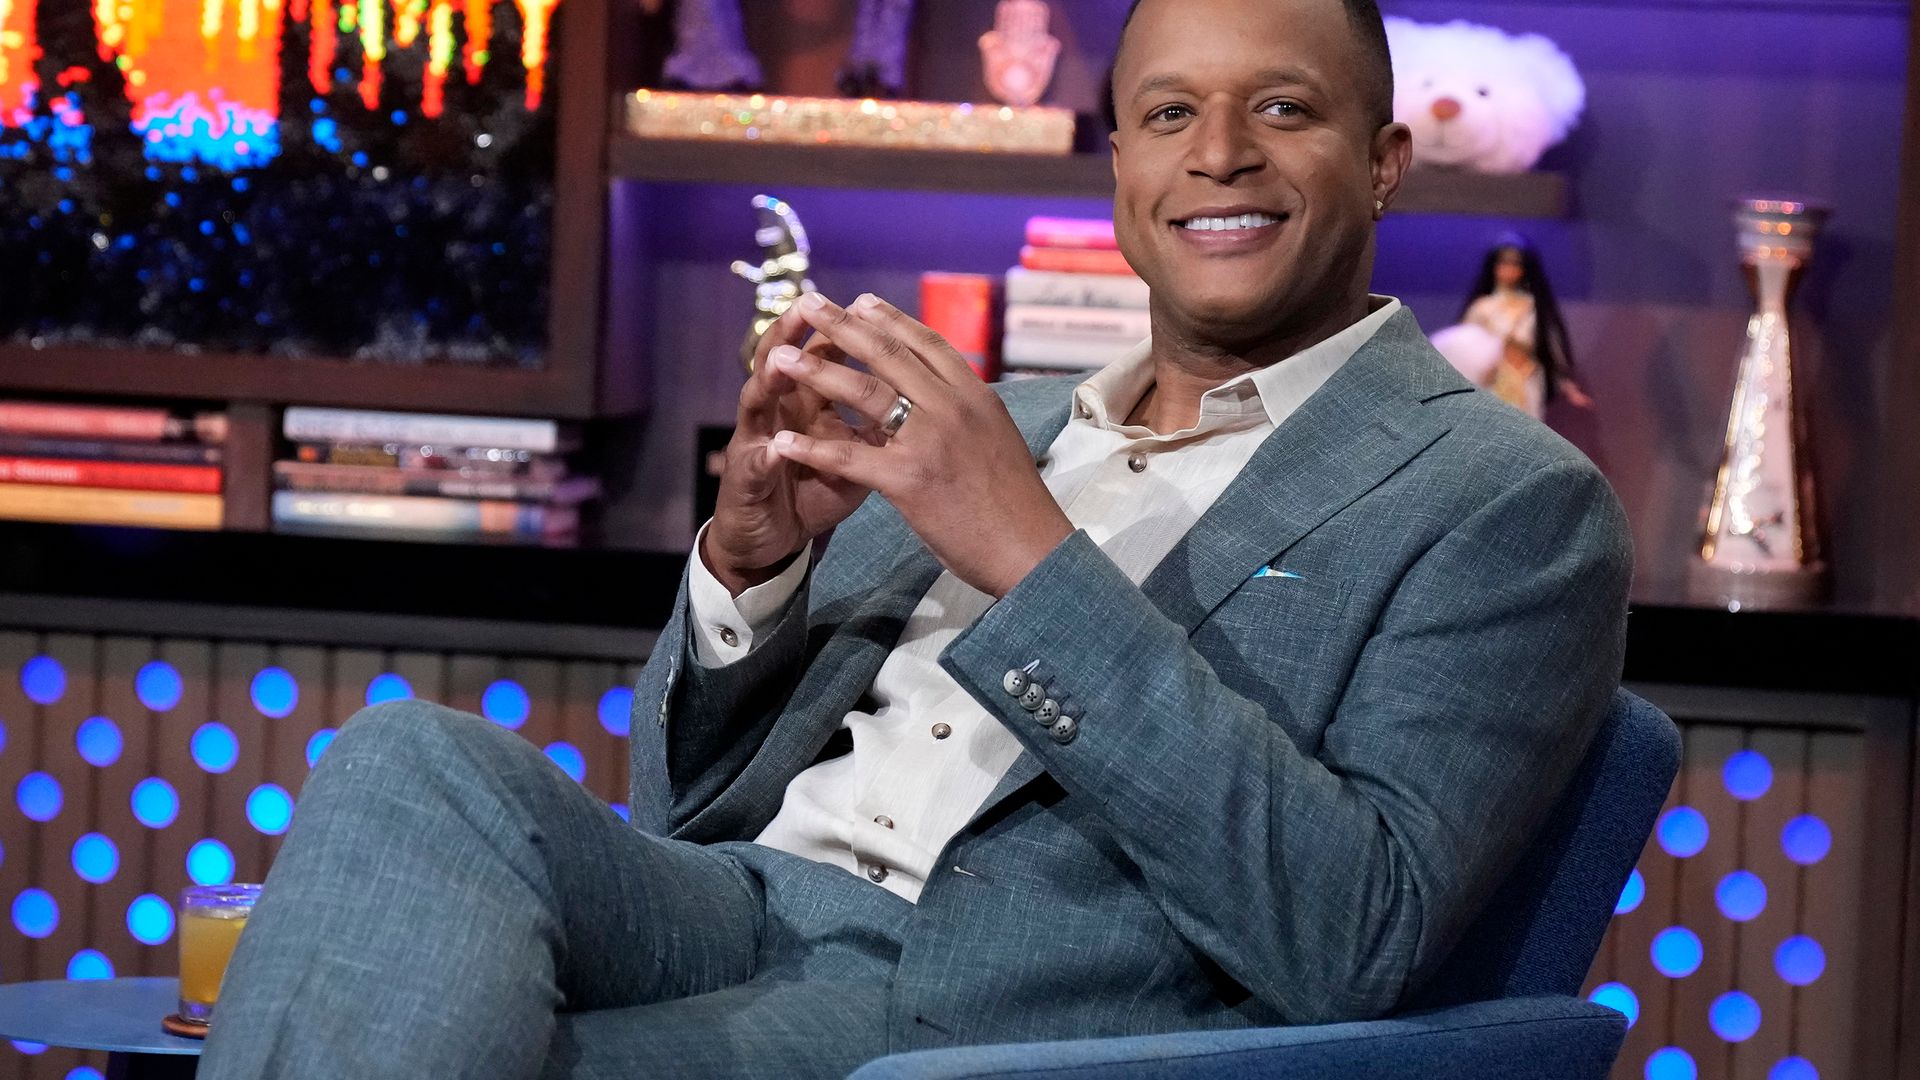 WATCH WHAT HAPPENS LIVE WITH ANDY COHEN -- Episode 21103 -- Pictured: Craig Melvin -- (Photo by: Charles Sykes/Bravo via Getty Images)